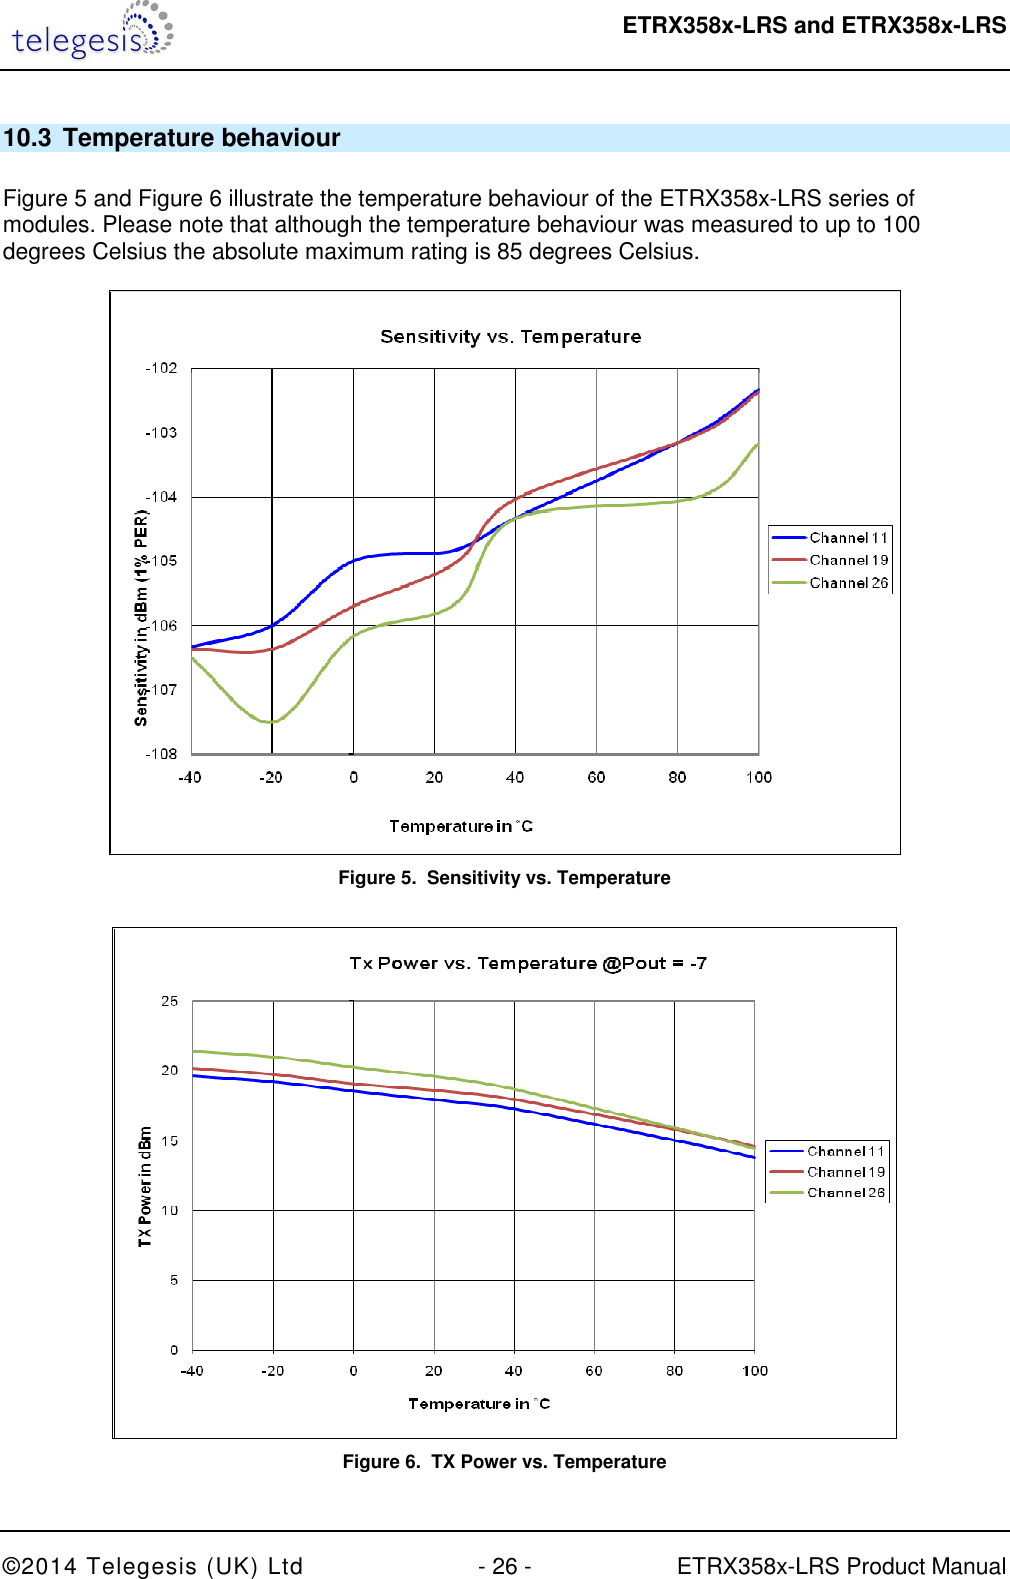  ETRX358x-LRS and ETRX358x-LRS  ©2014 Telegesis (UK) Ltd  - 26 -  ETRX358x-LRS Product Manual 10.3  Temperature behaviour  Figure 5 and Figure 6 illustrate the temperature behaviour of the ETRX358x-LRS series of modules. Please note that although the temperature behaviour was measured to up to 100 degrees Celsius the absolute maximum rating is 85 degrees Celsius.    Figure 5.  Sensitivity vs. Temperature   Figure 6.  TX Power vs. Temperature 